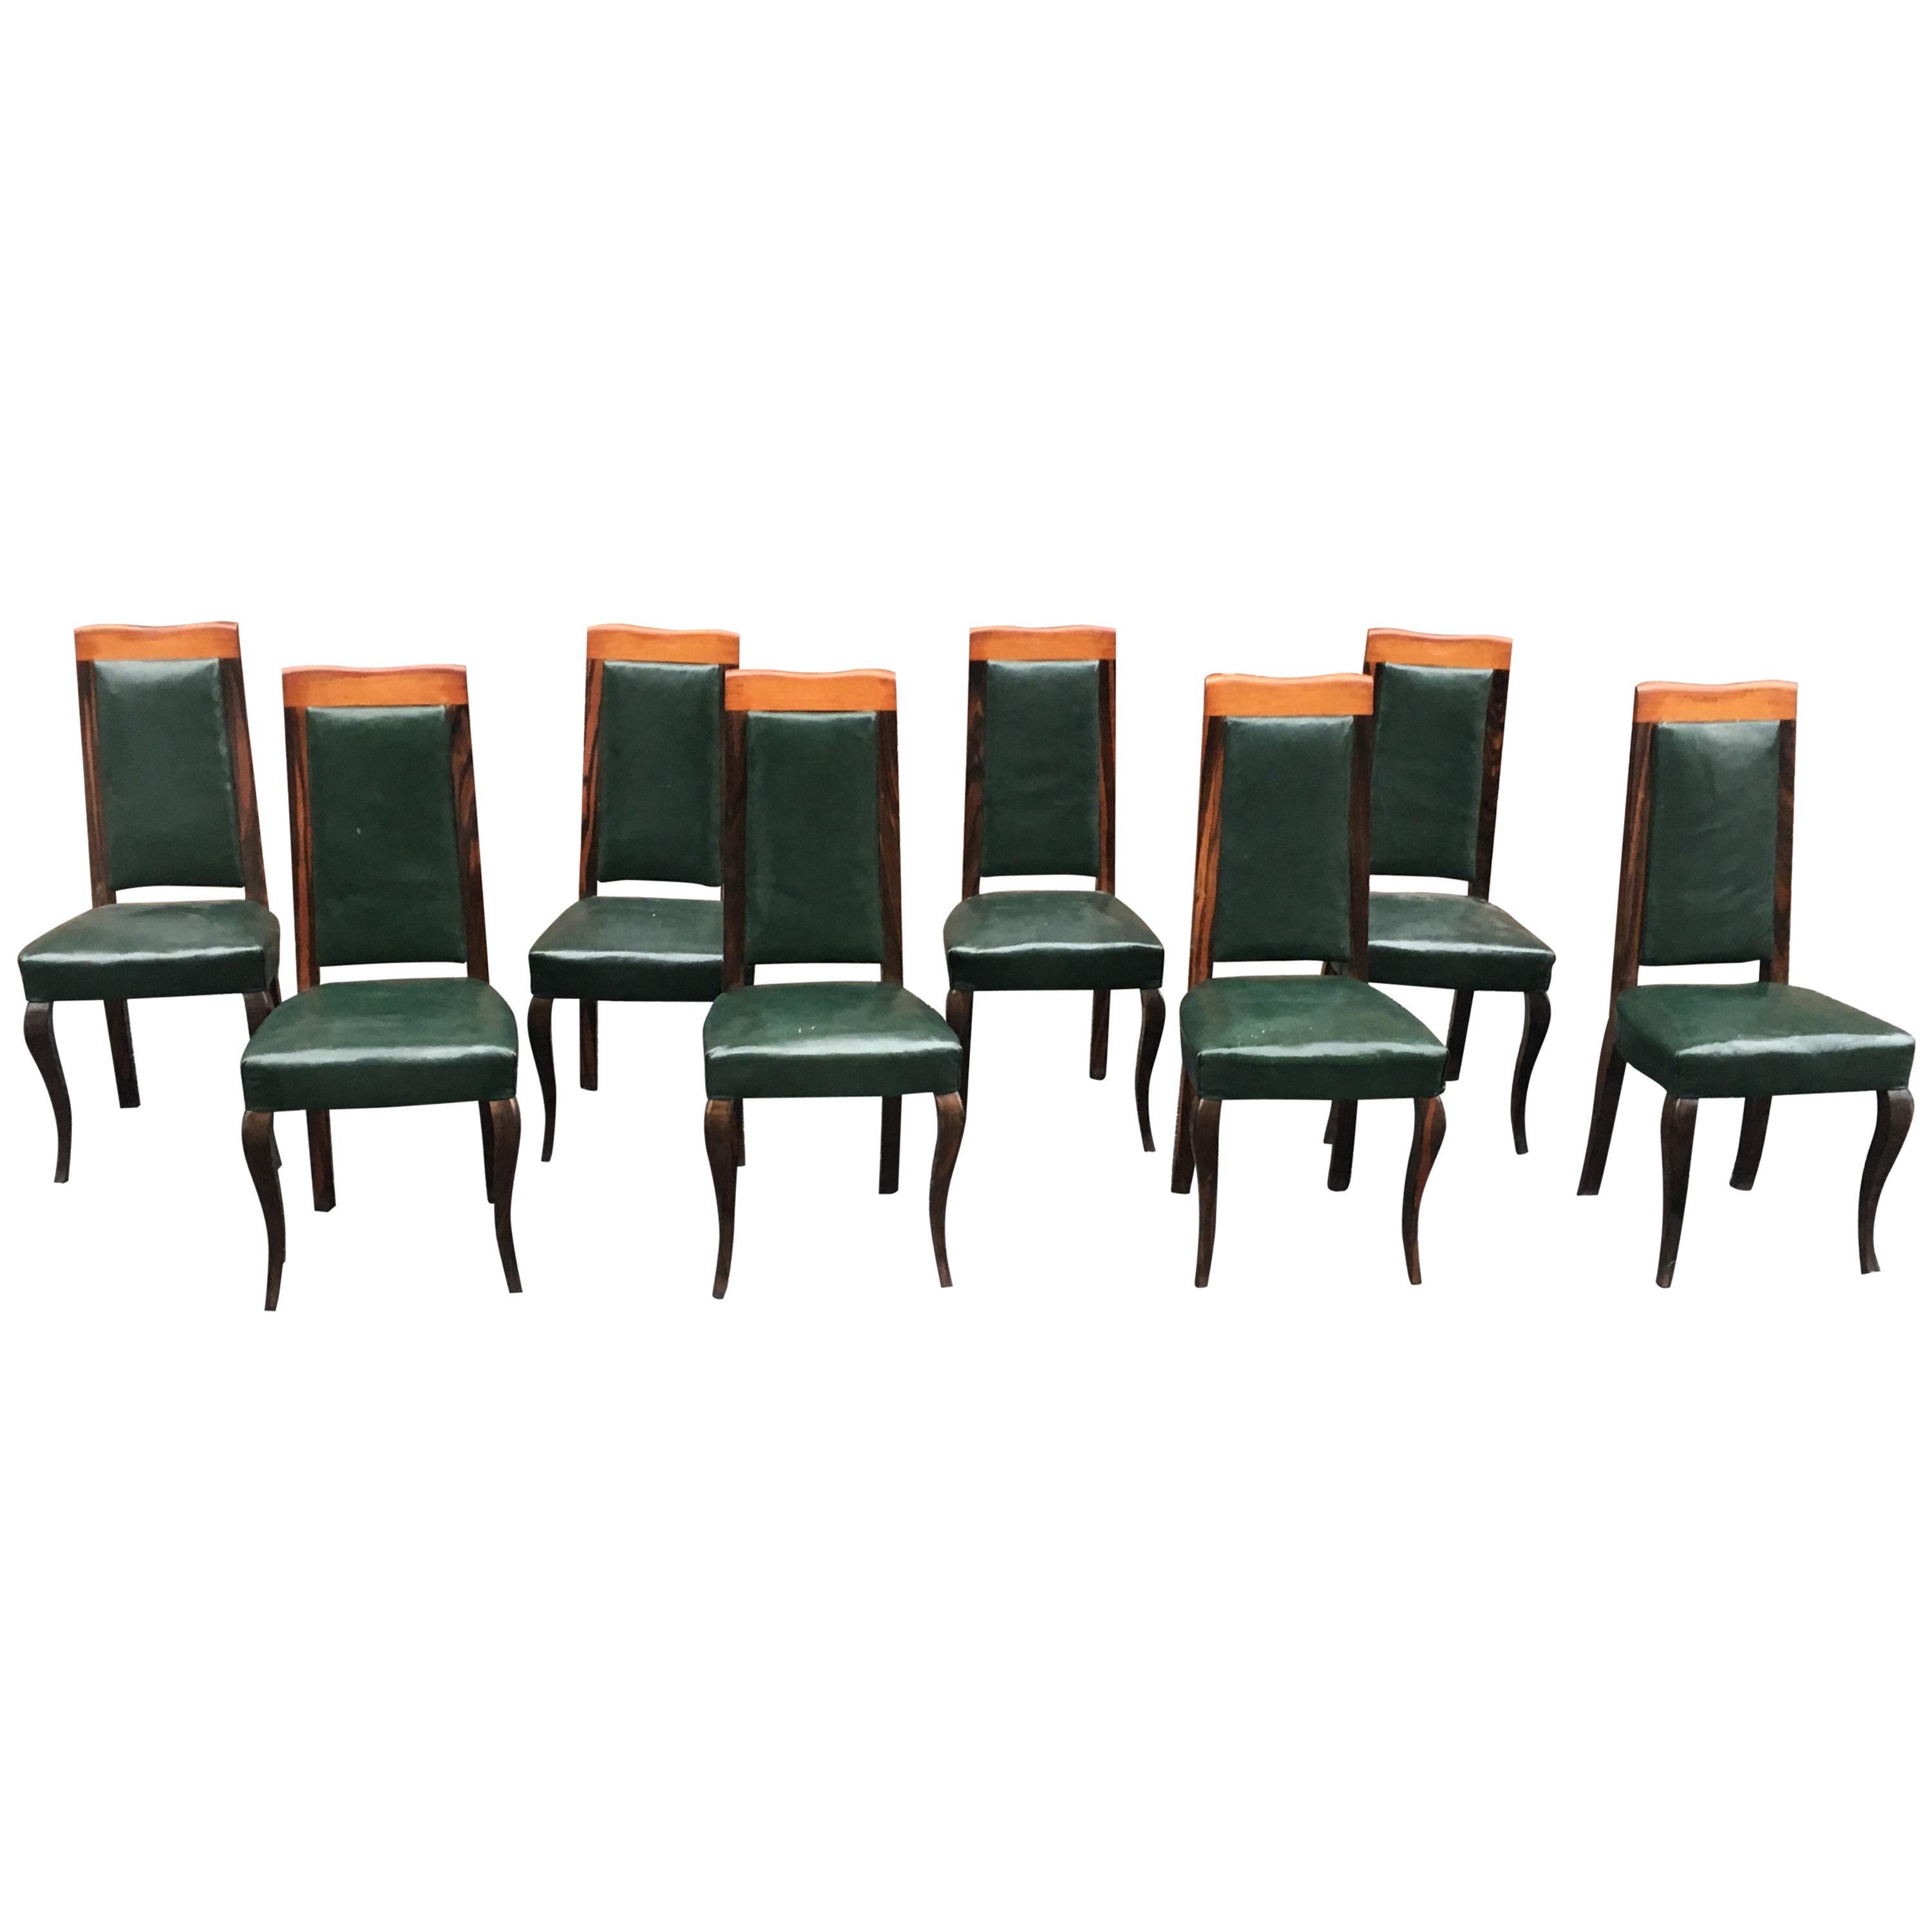 Suite of 8 Art Deco Chairs in Macassar Ebony and Leather For Sale